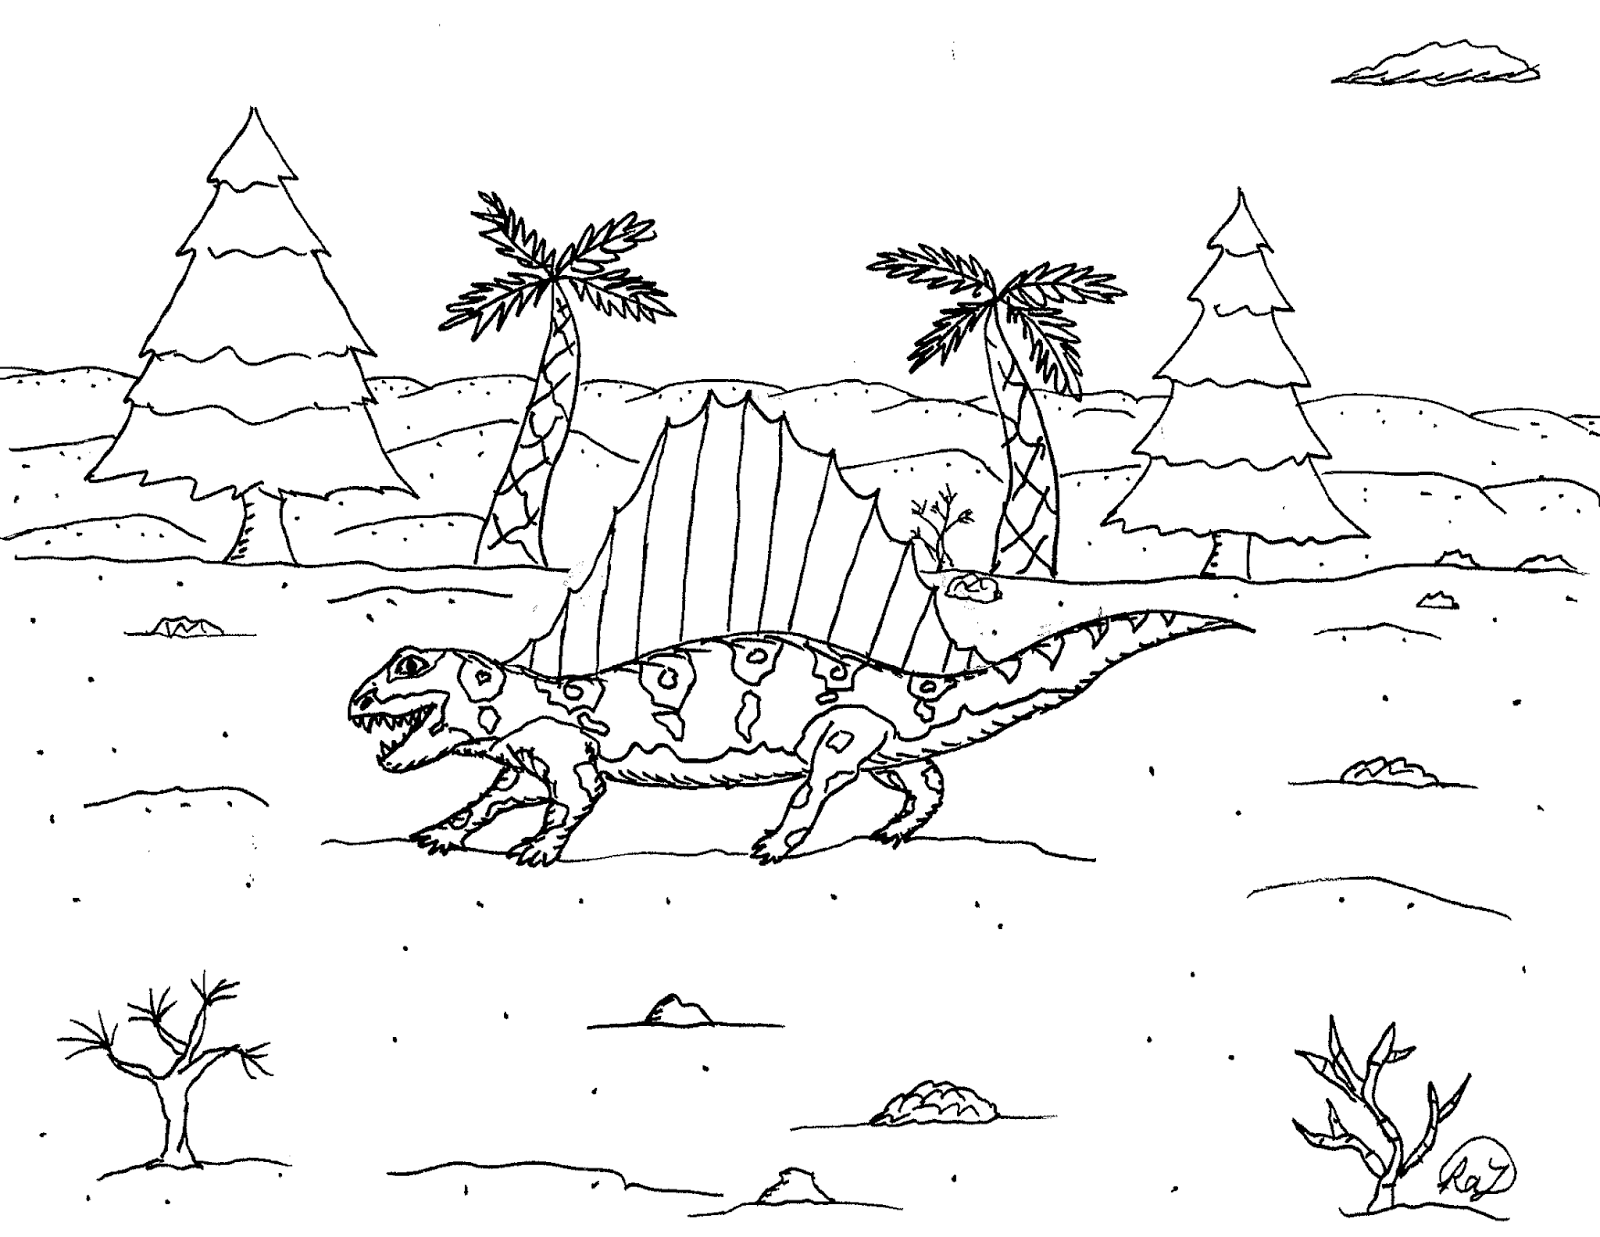 Download Robin's Great Coloring Pages: Ouranosaurus, Spinosaurs, and Dimetrodon the Sailed Reptiles